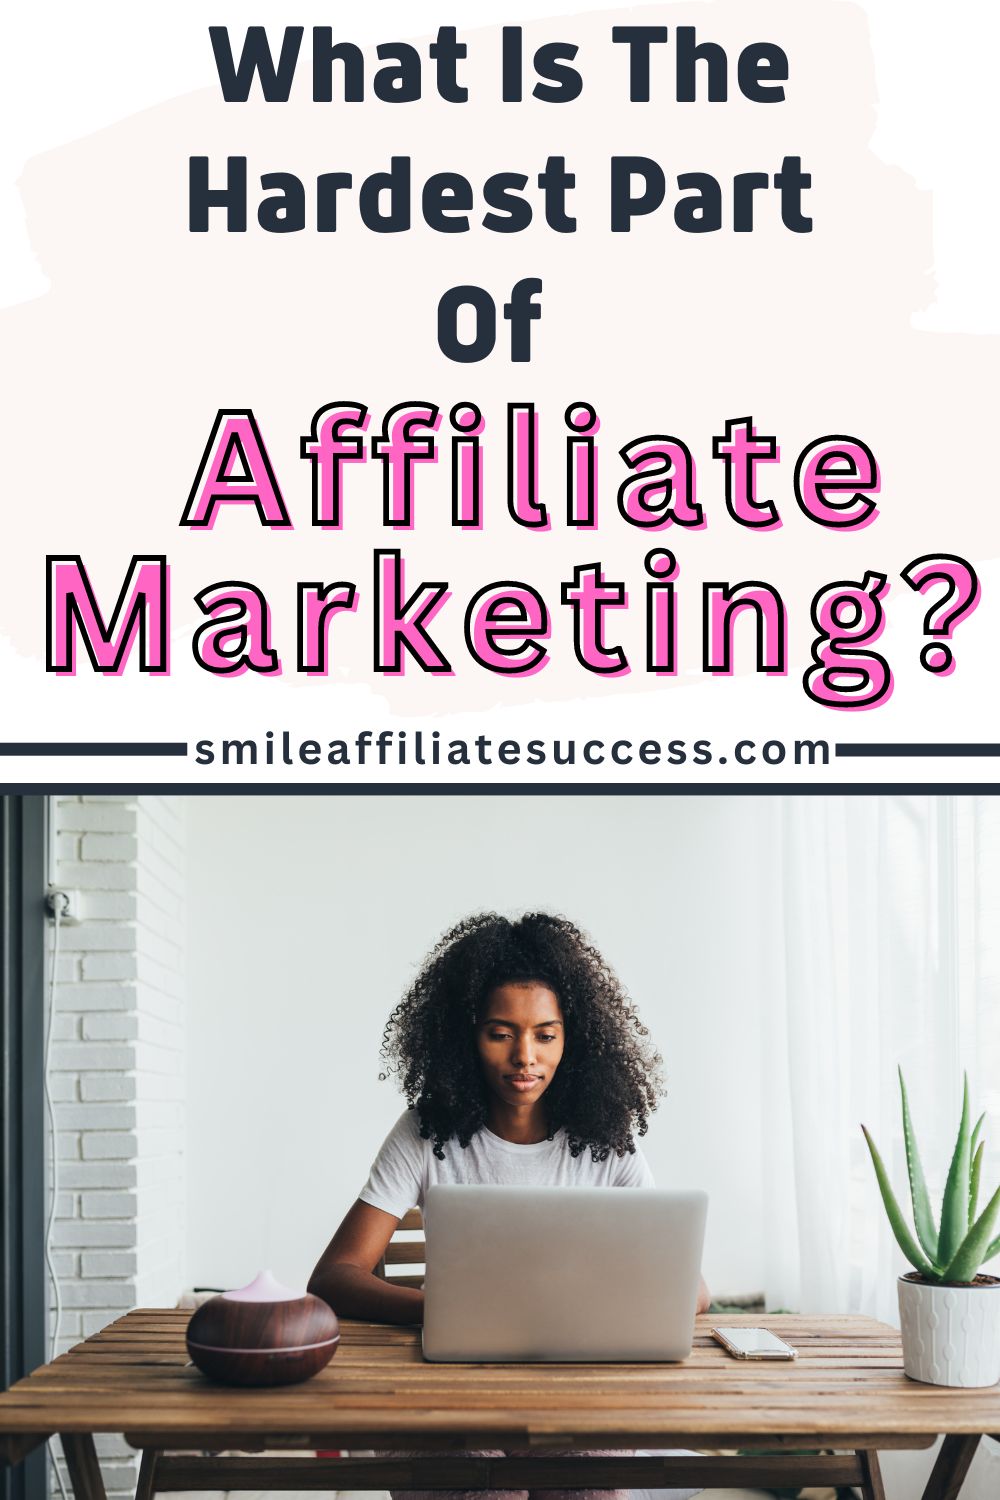 What Is The Hardest Part Of Affiliate Marketing?